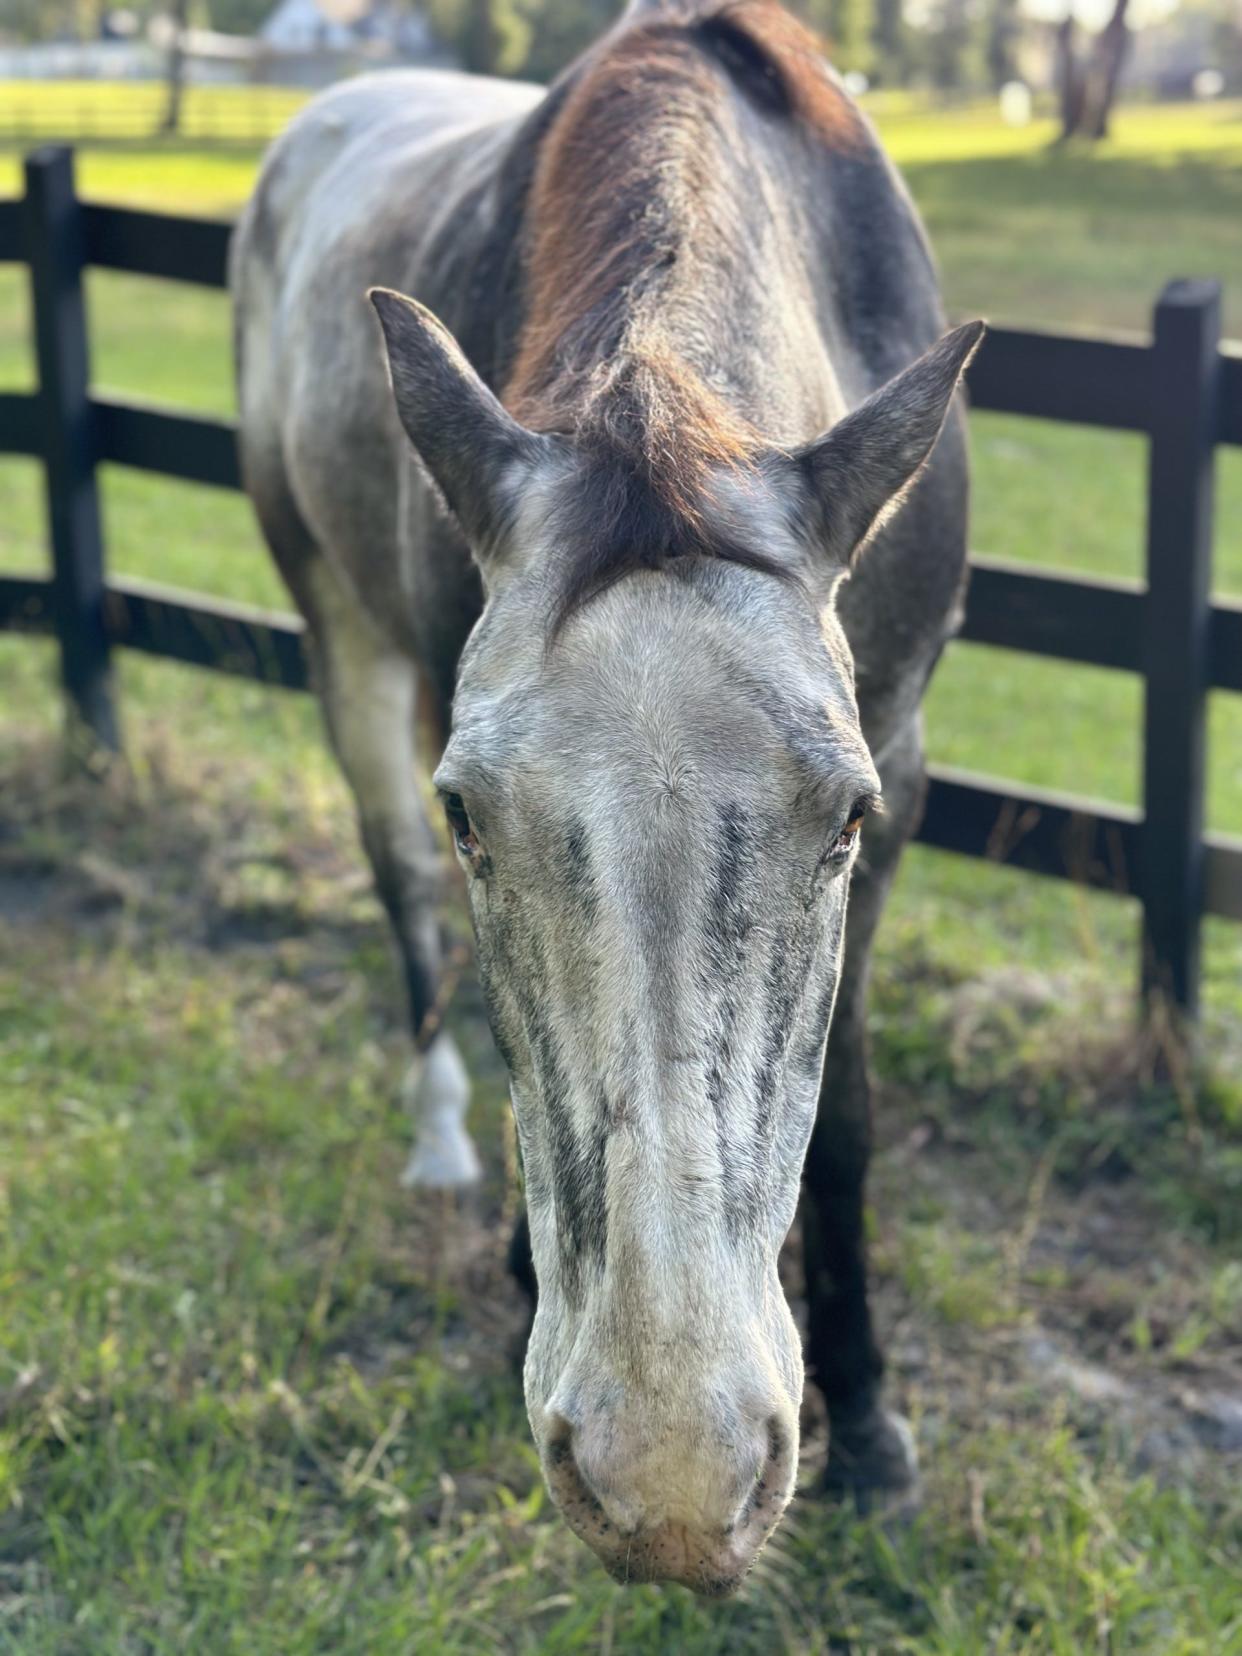 Sparky, a 27-year-old gelding, was found dead in a pasture bleeding heavily from the head. Preliminary reports indicate the horse was shot. But now a deputy says he may have run into a tree.